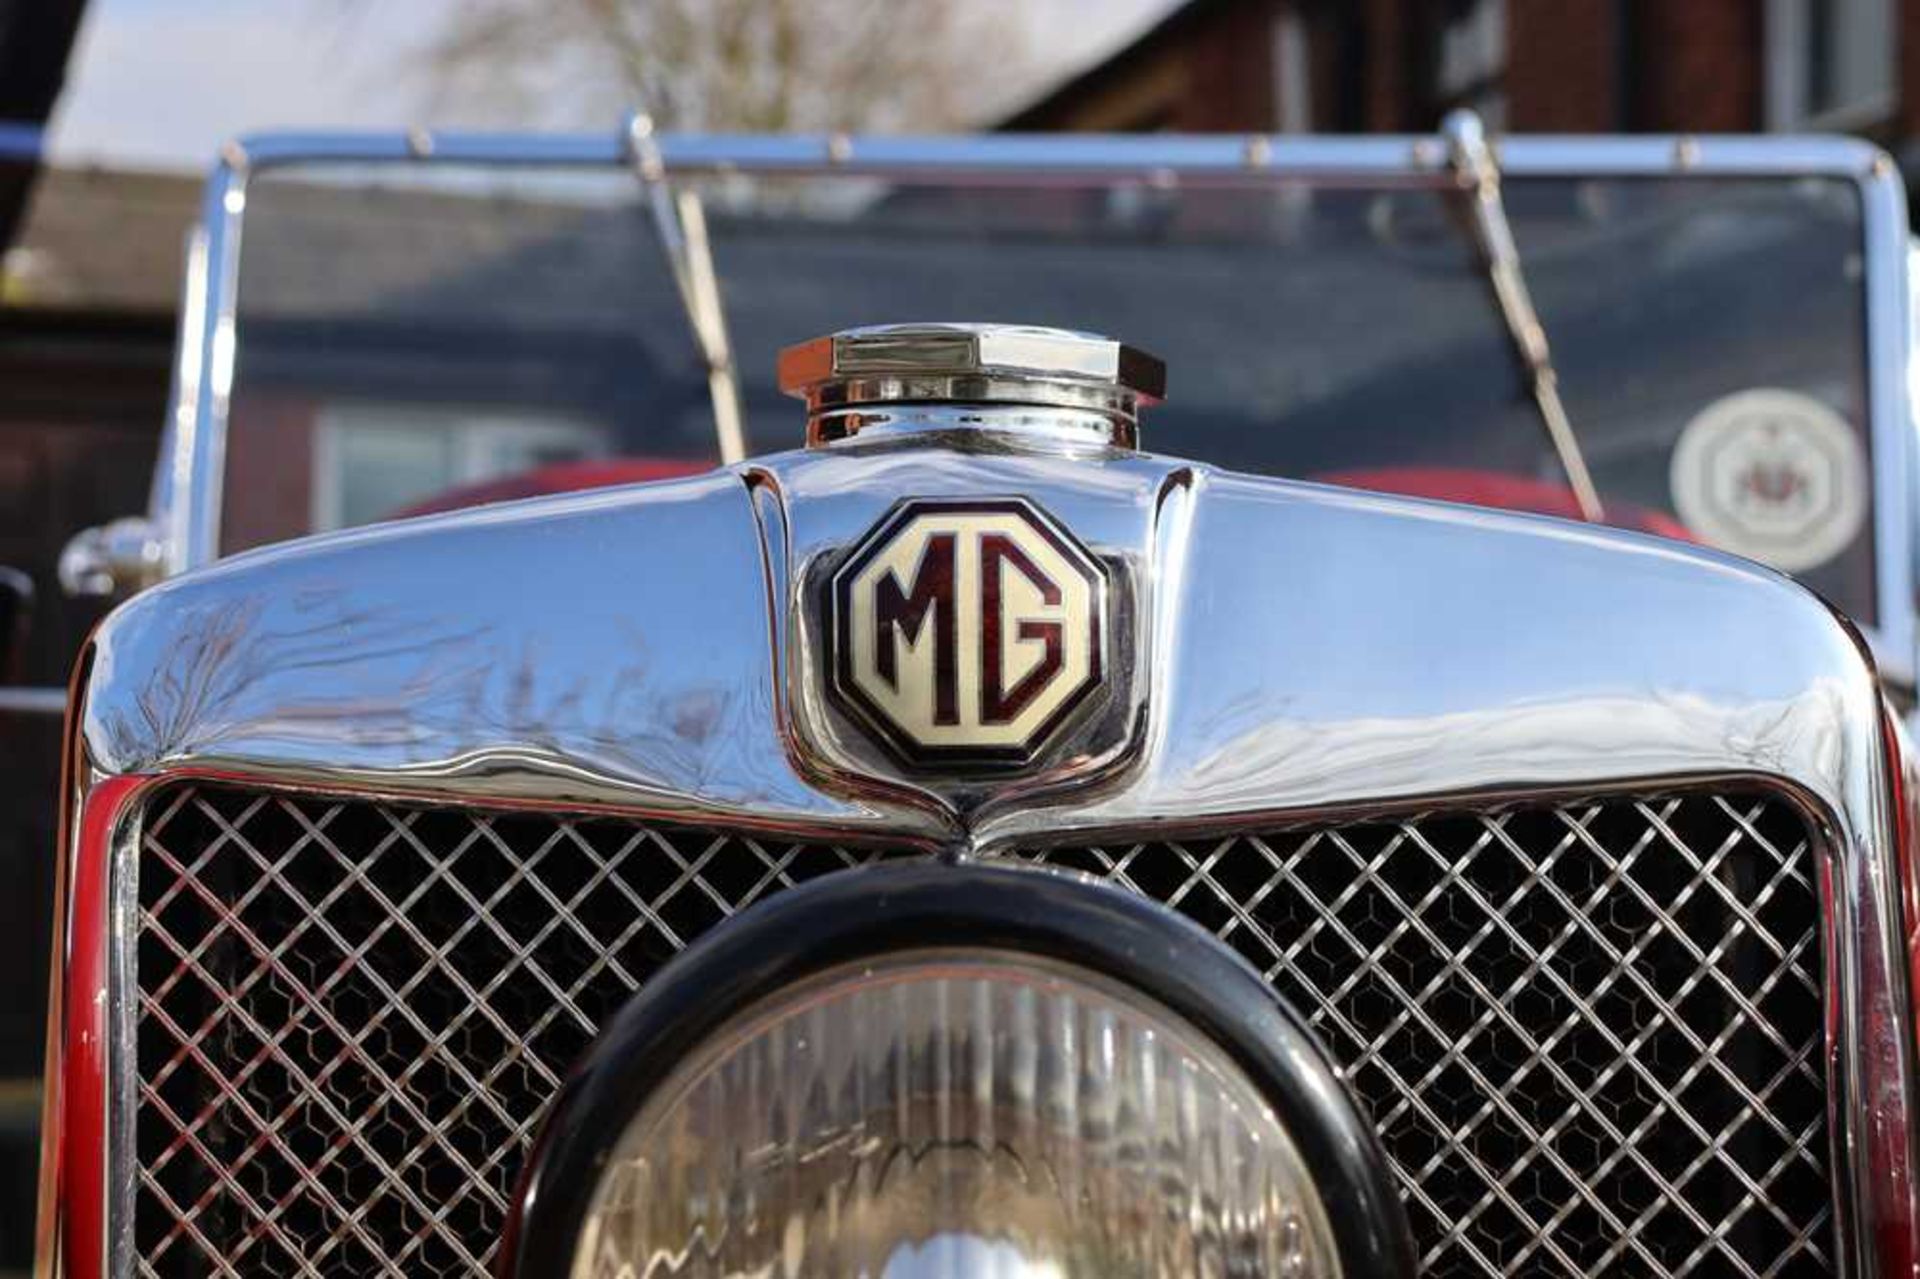 1932 MG J2 Midget Excellently restored and with period competition history - Image 22 of 76